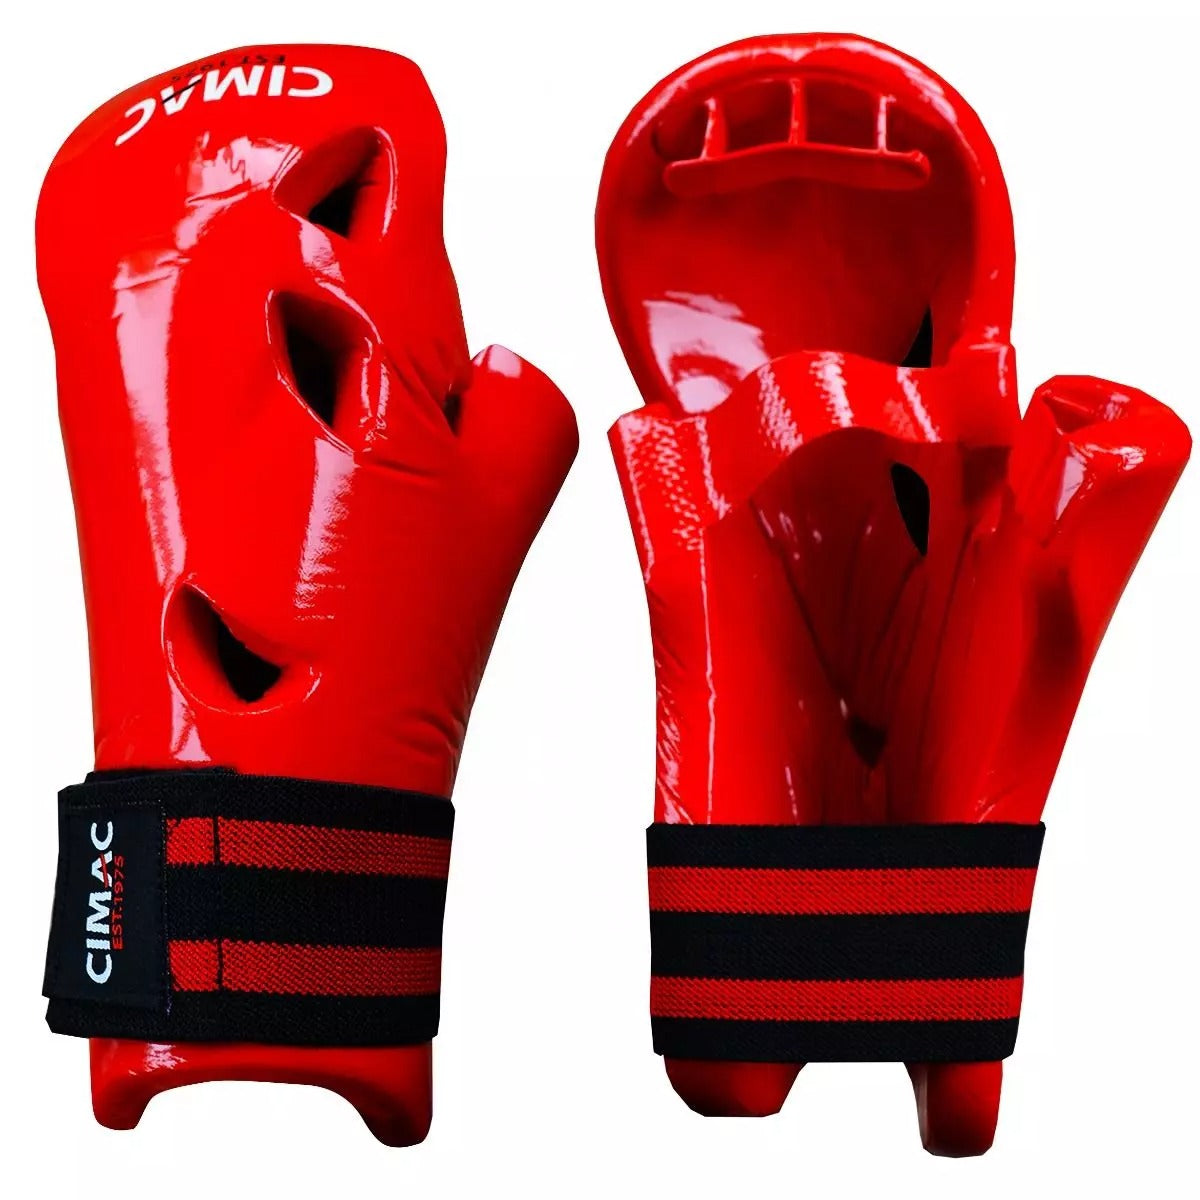 Cimac Dipped Foam Kickboxing Gloves Martial Arts Mitts